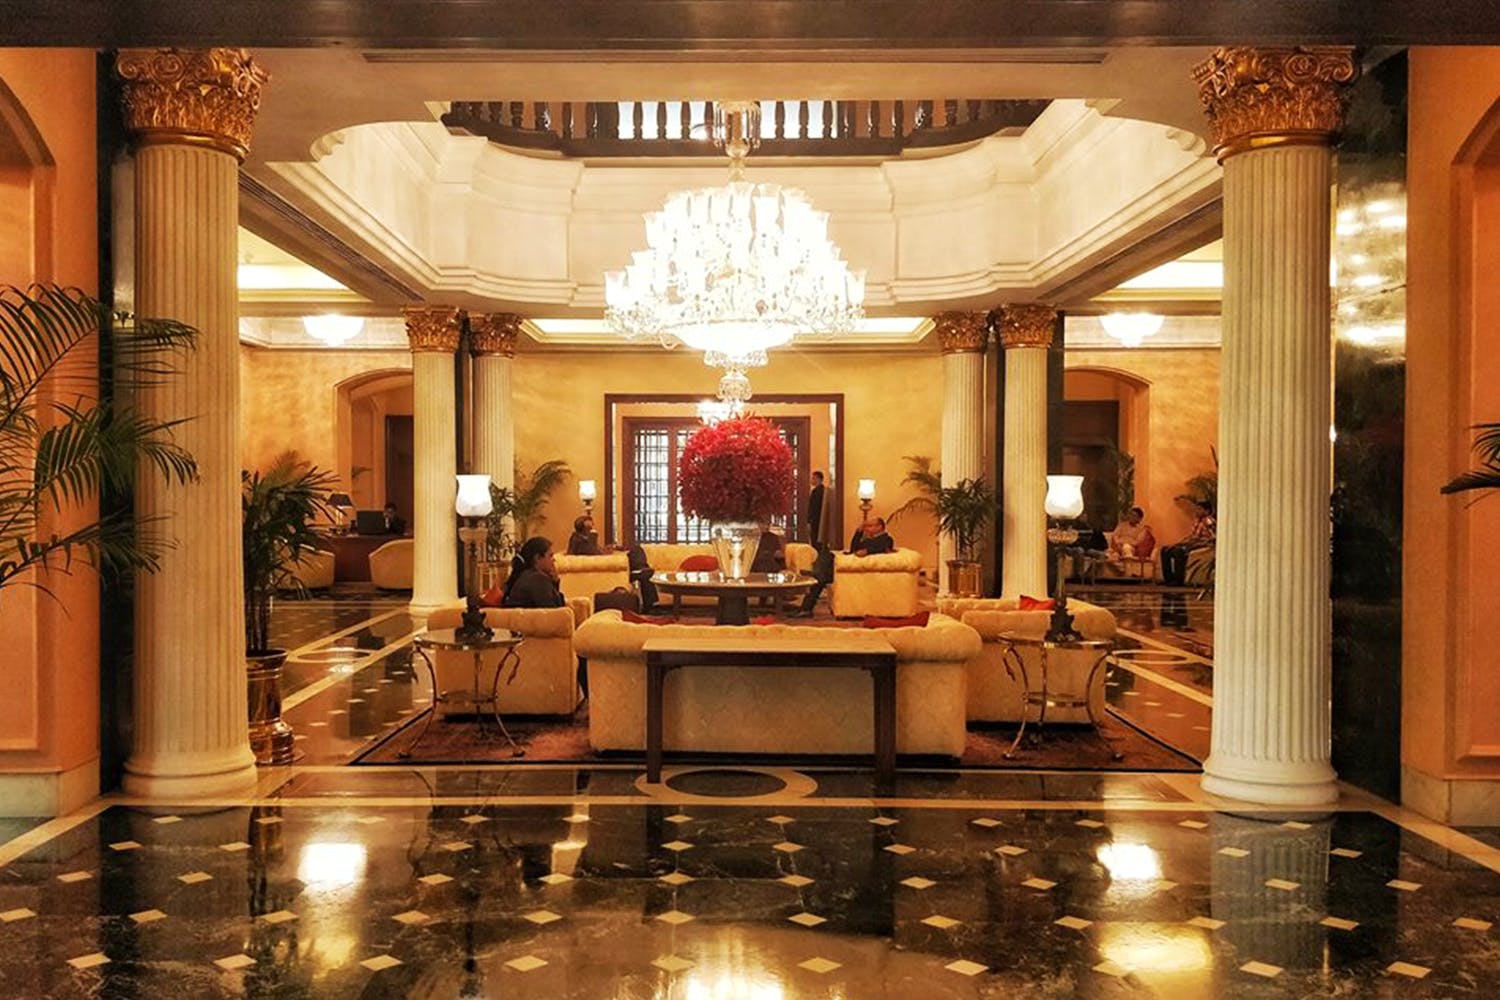 A Grand Experience Plan Your Next Staycation At This Iconic So Kolkata Hotel